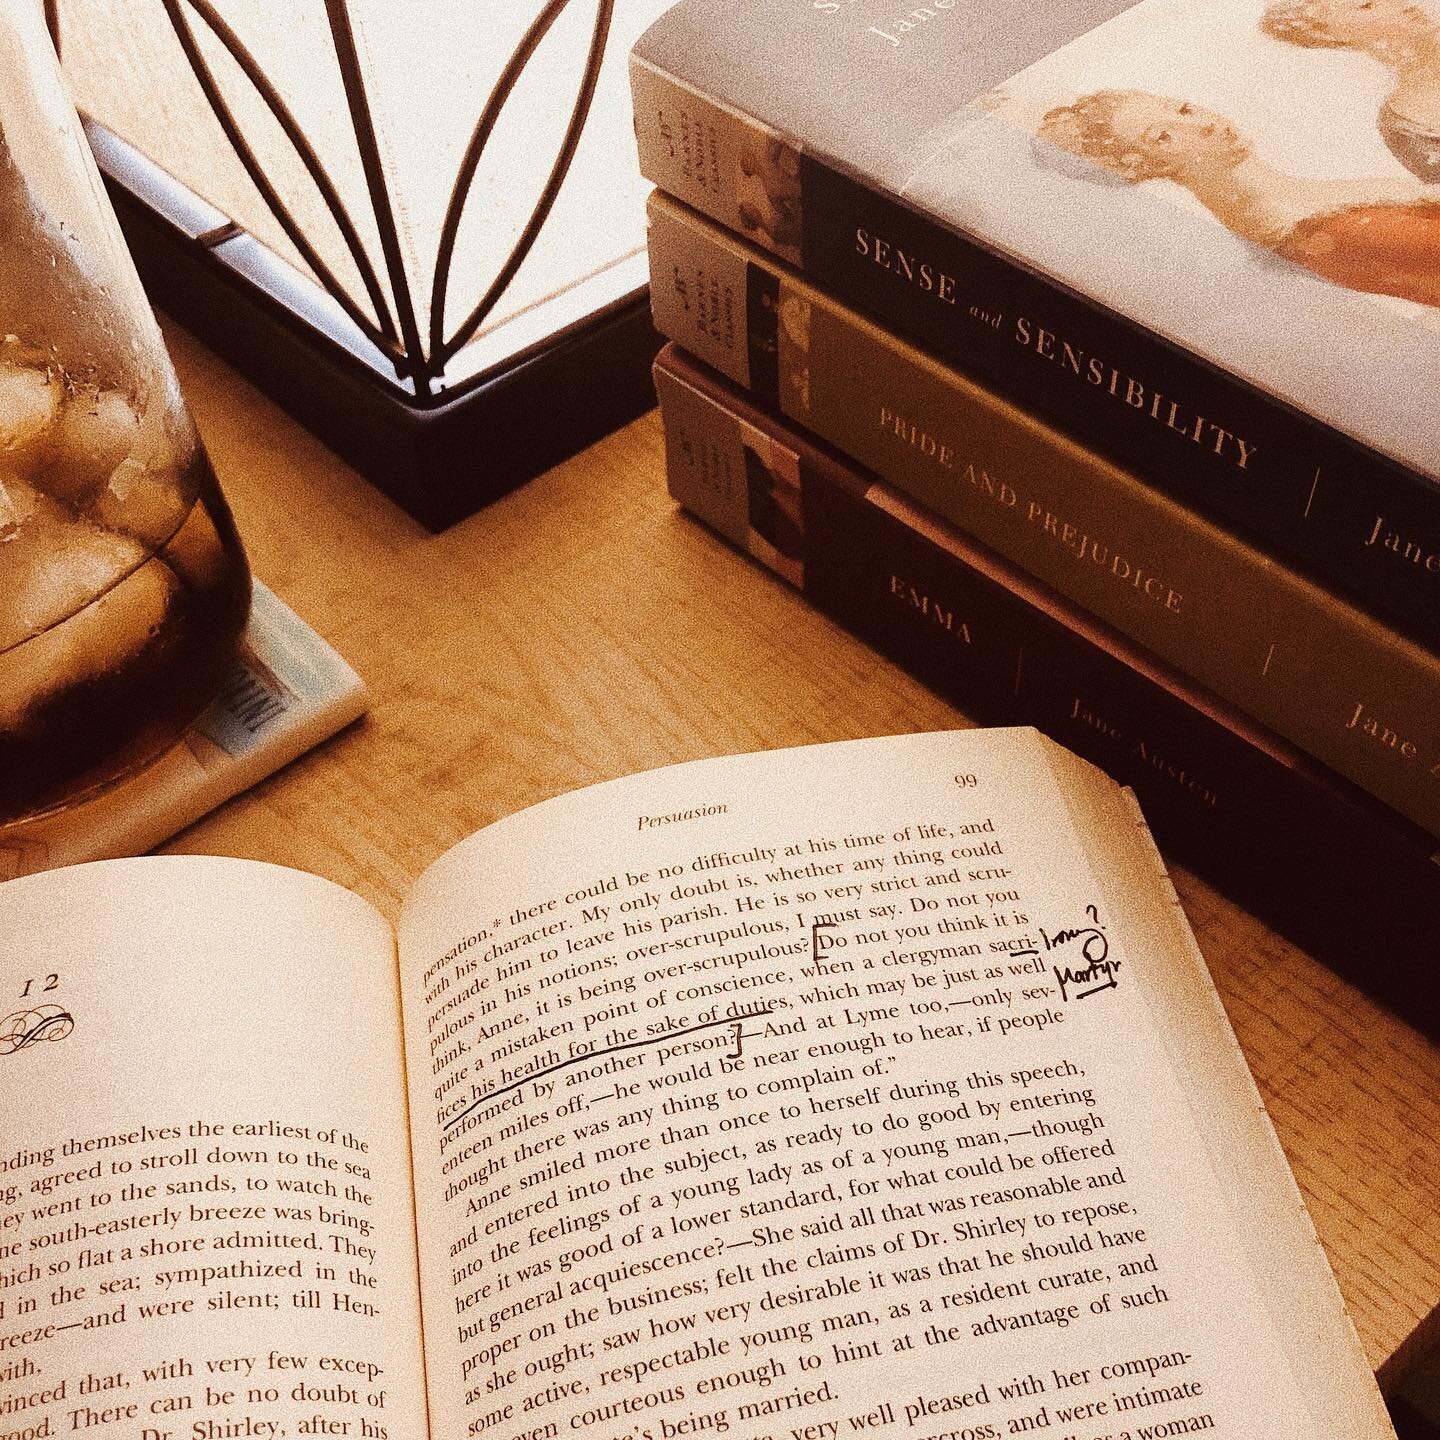 Do any of you ever go through old books you've read just to look at your past annotations/notes? It sounds so vain, I know, but I find it to be a good way to reconcile with my past self...
.
.
.
.
.
#novels #literature #janeausten #english #prideandp